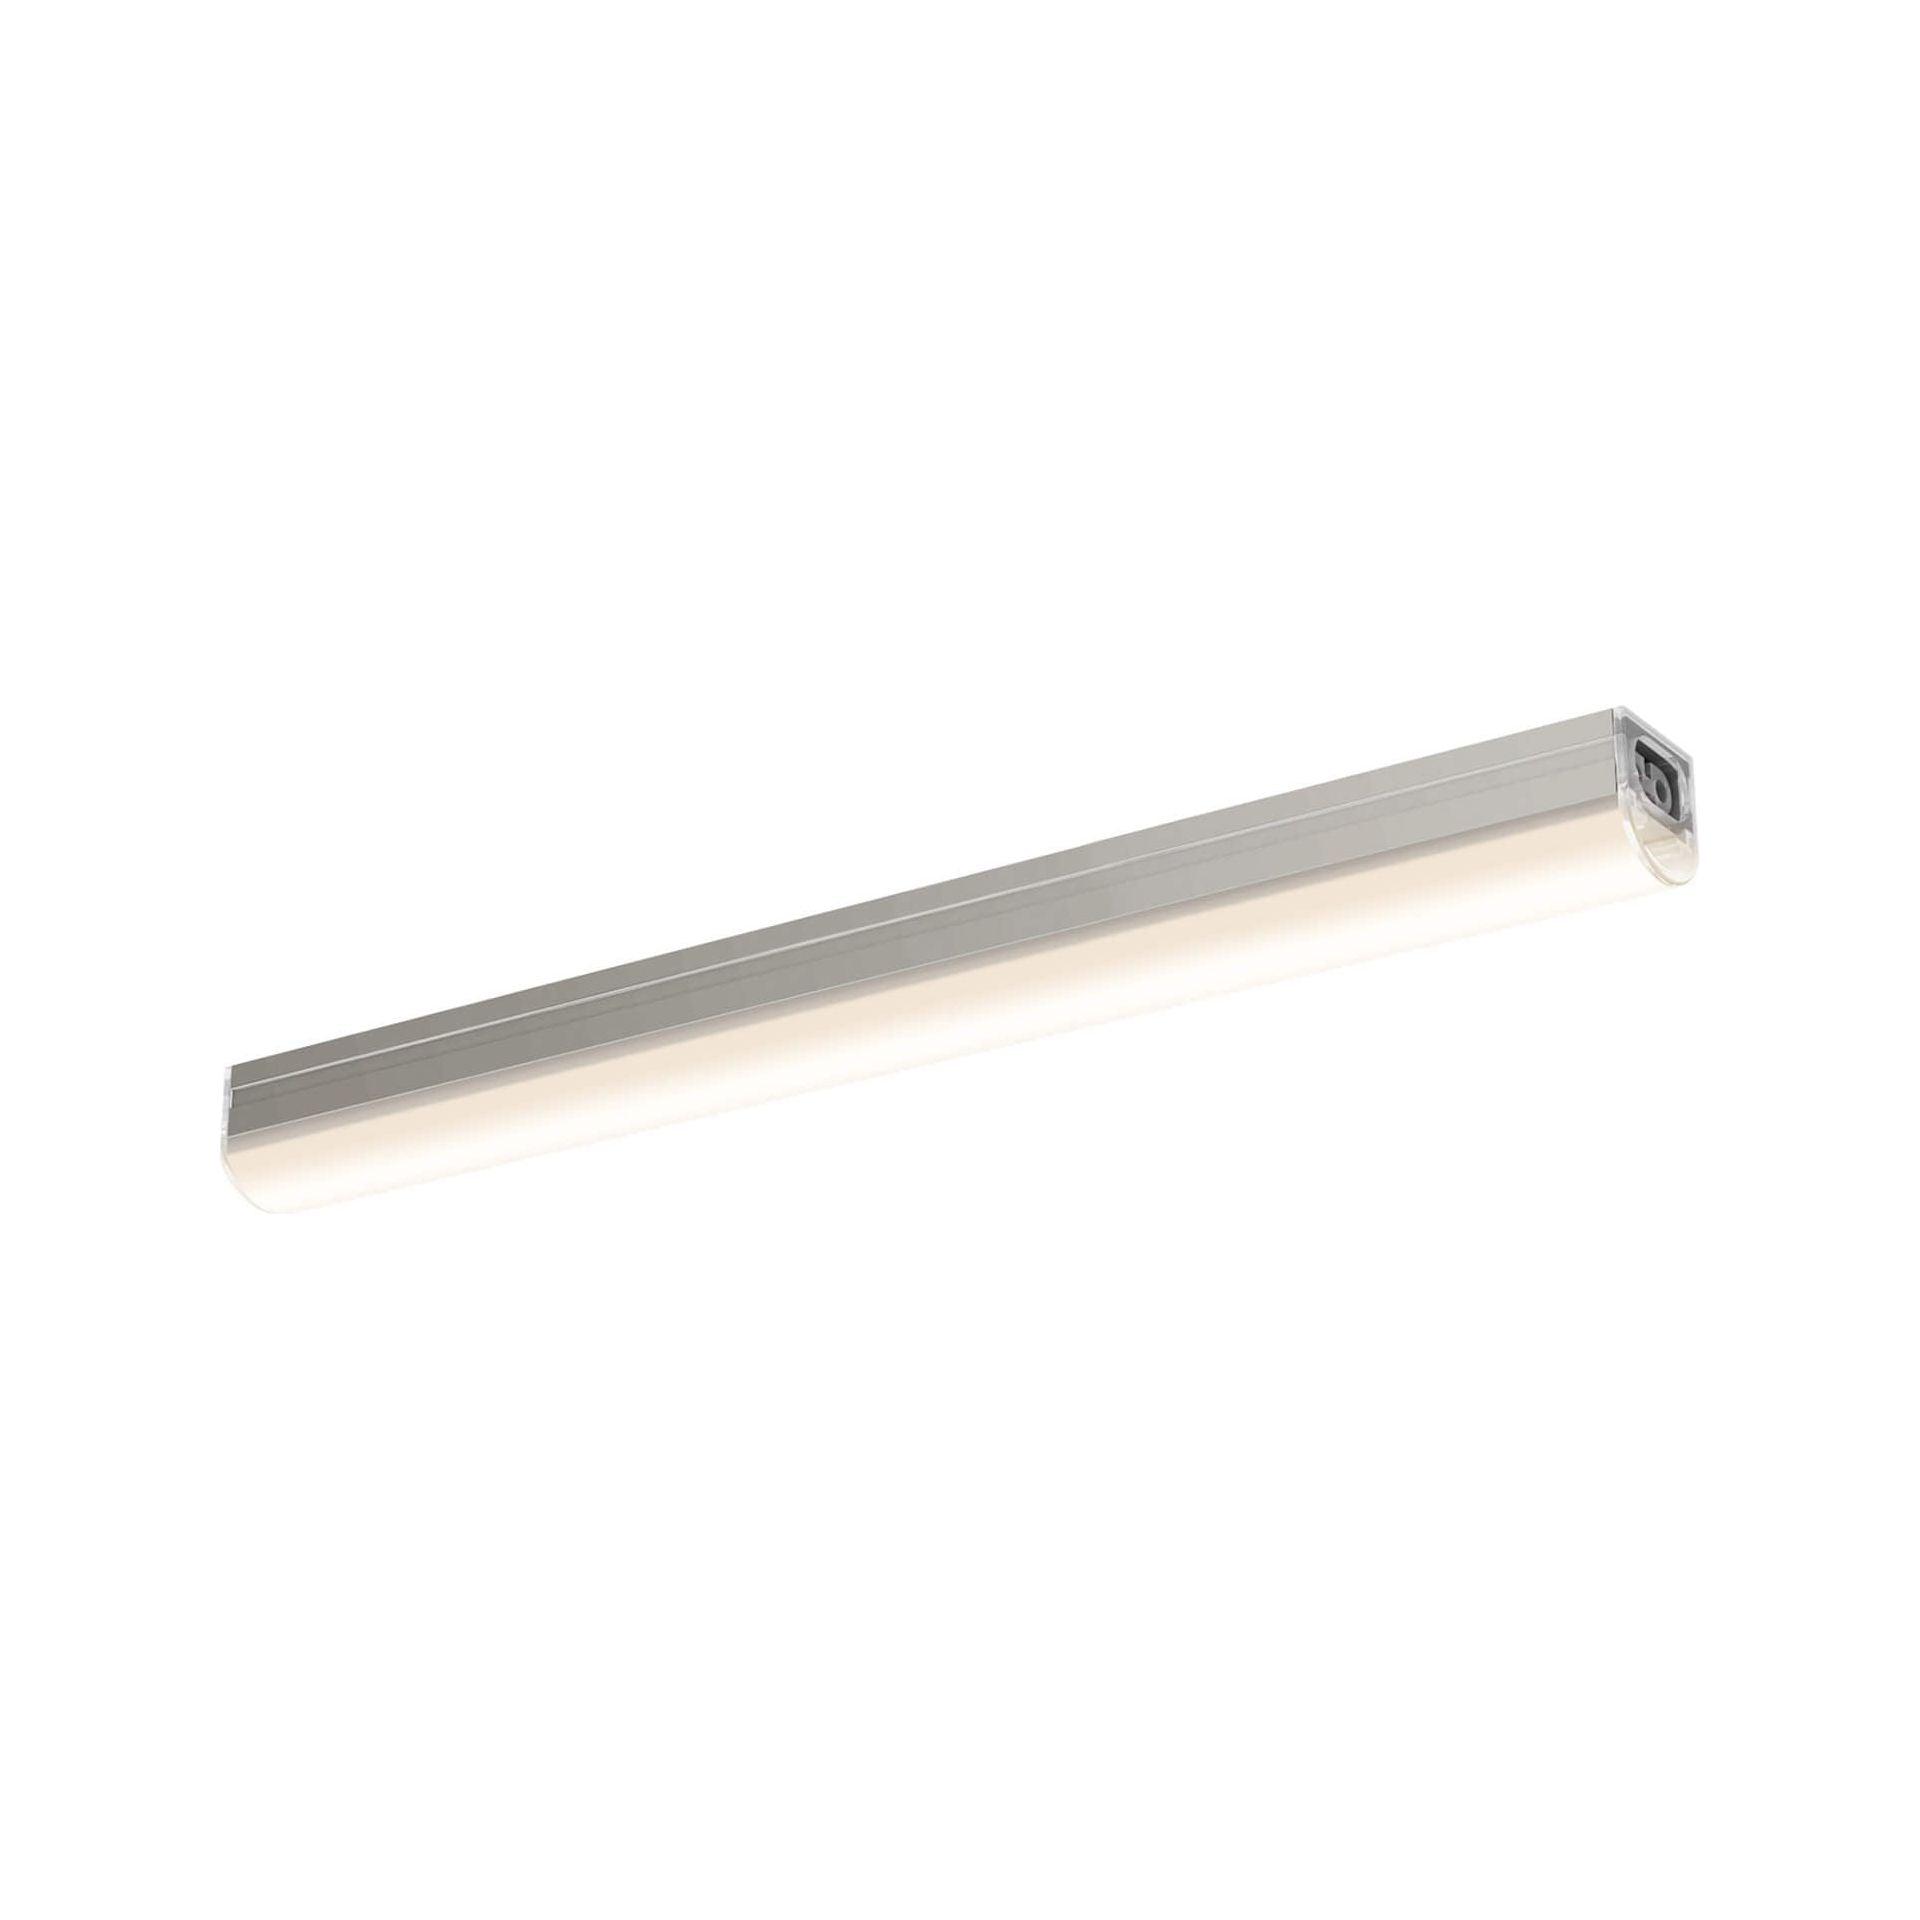 DALS - 36" PowerLED Linear Under Cabinet Light - Lights Canada